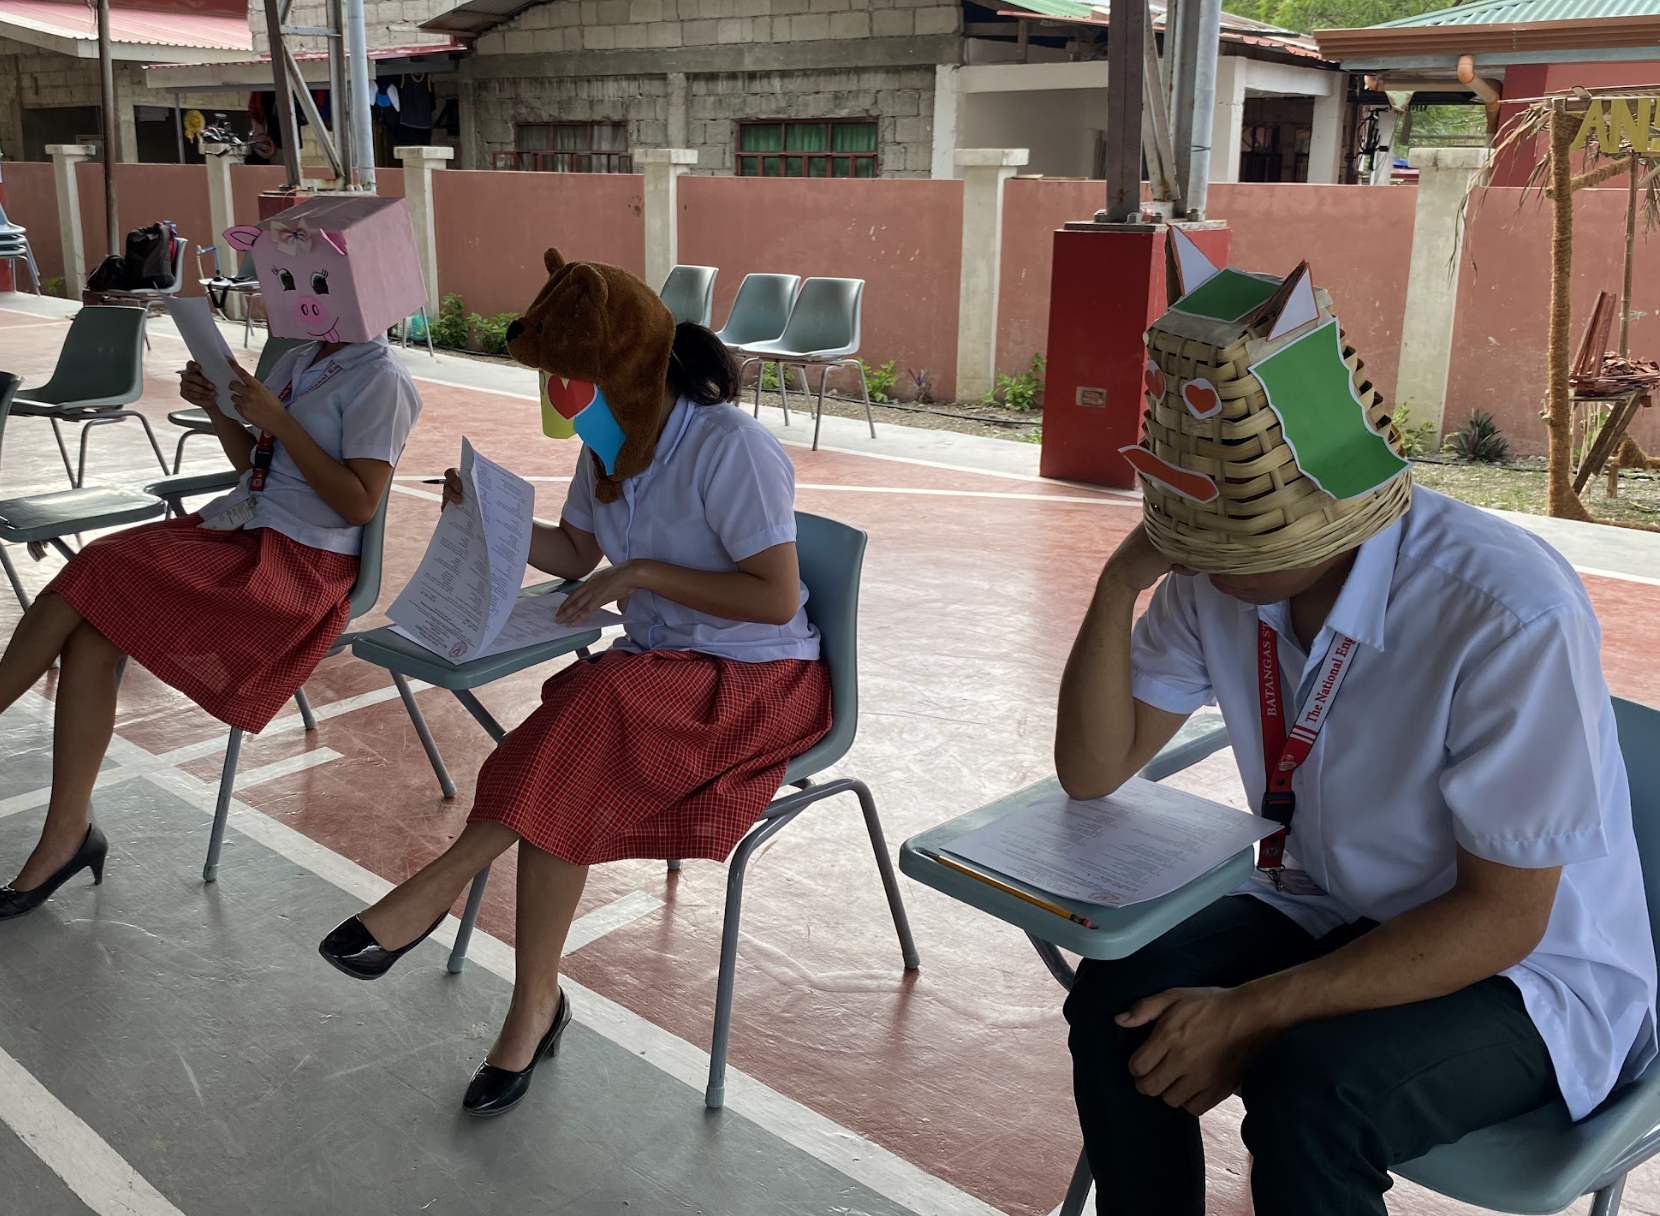 Three students wearing animal masks sit reading books outdoors, with one teacher supervising